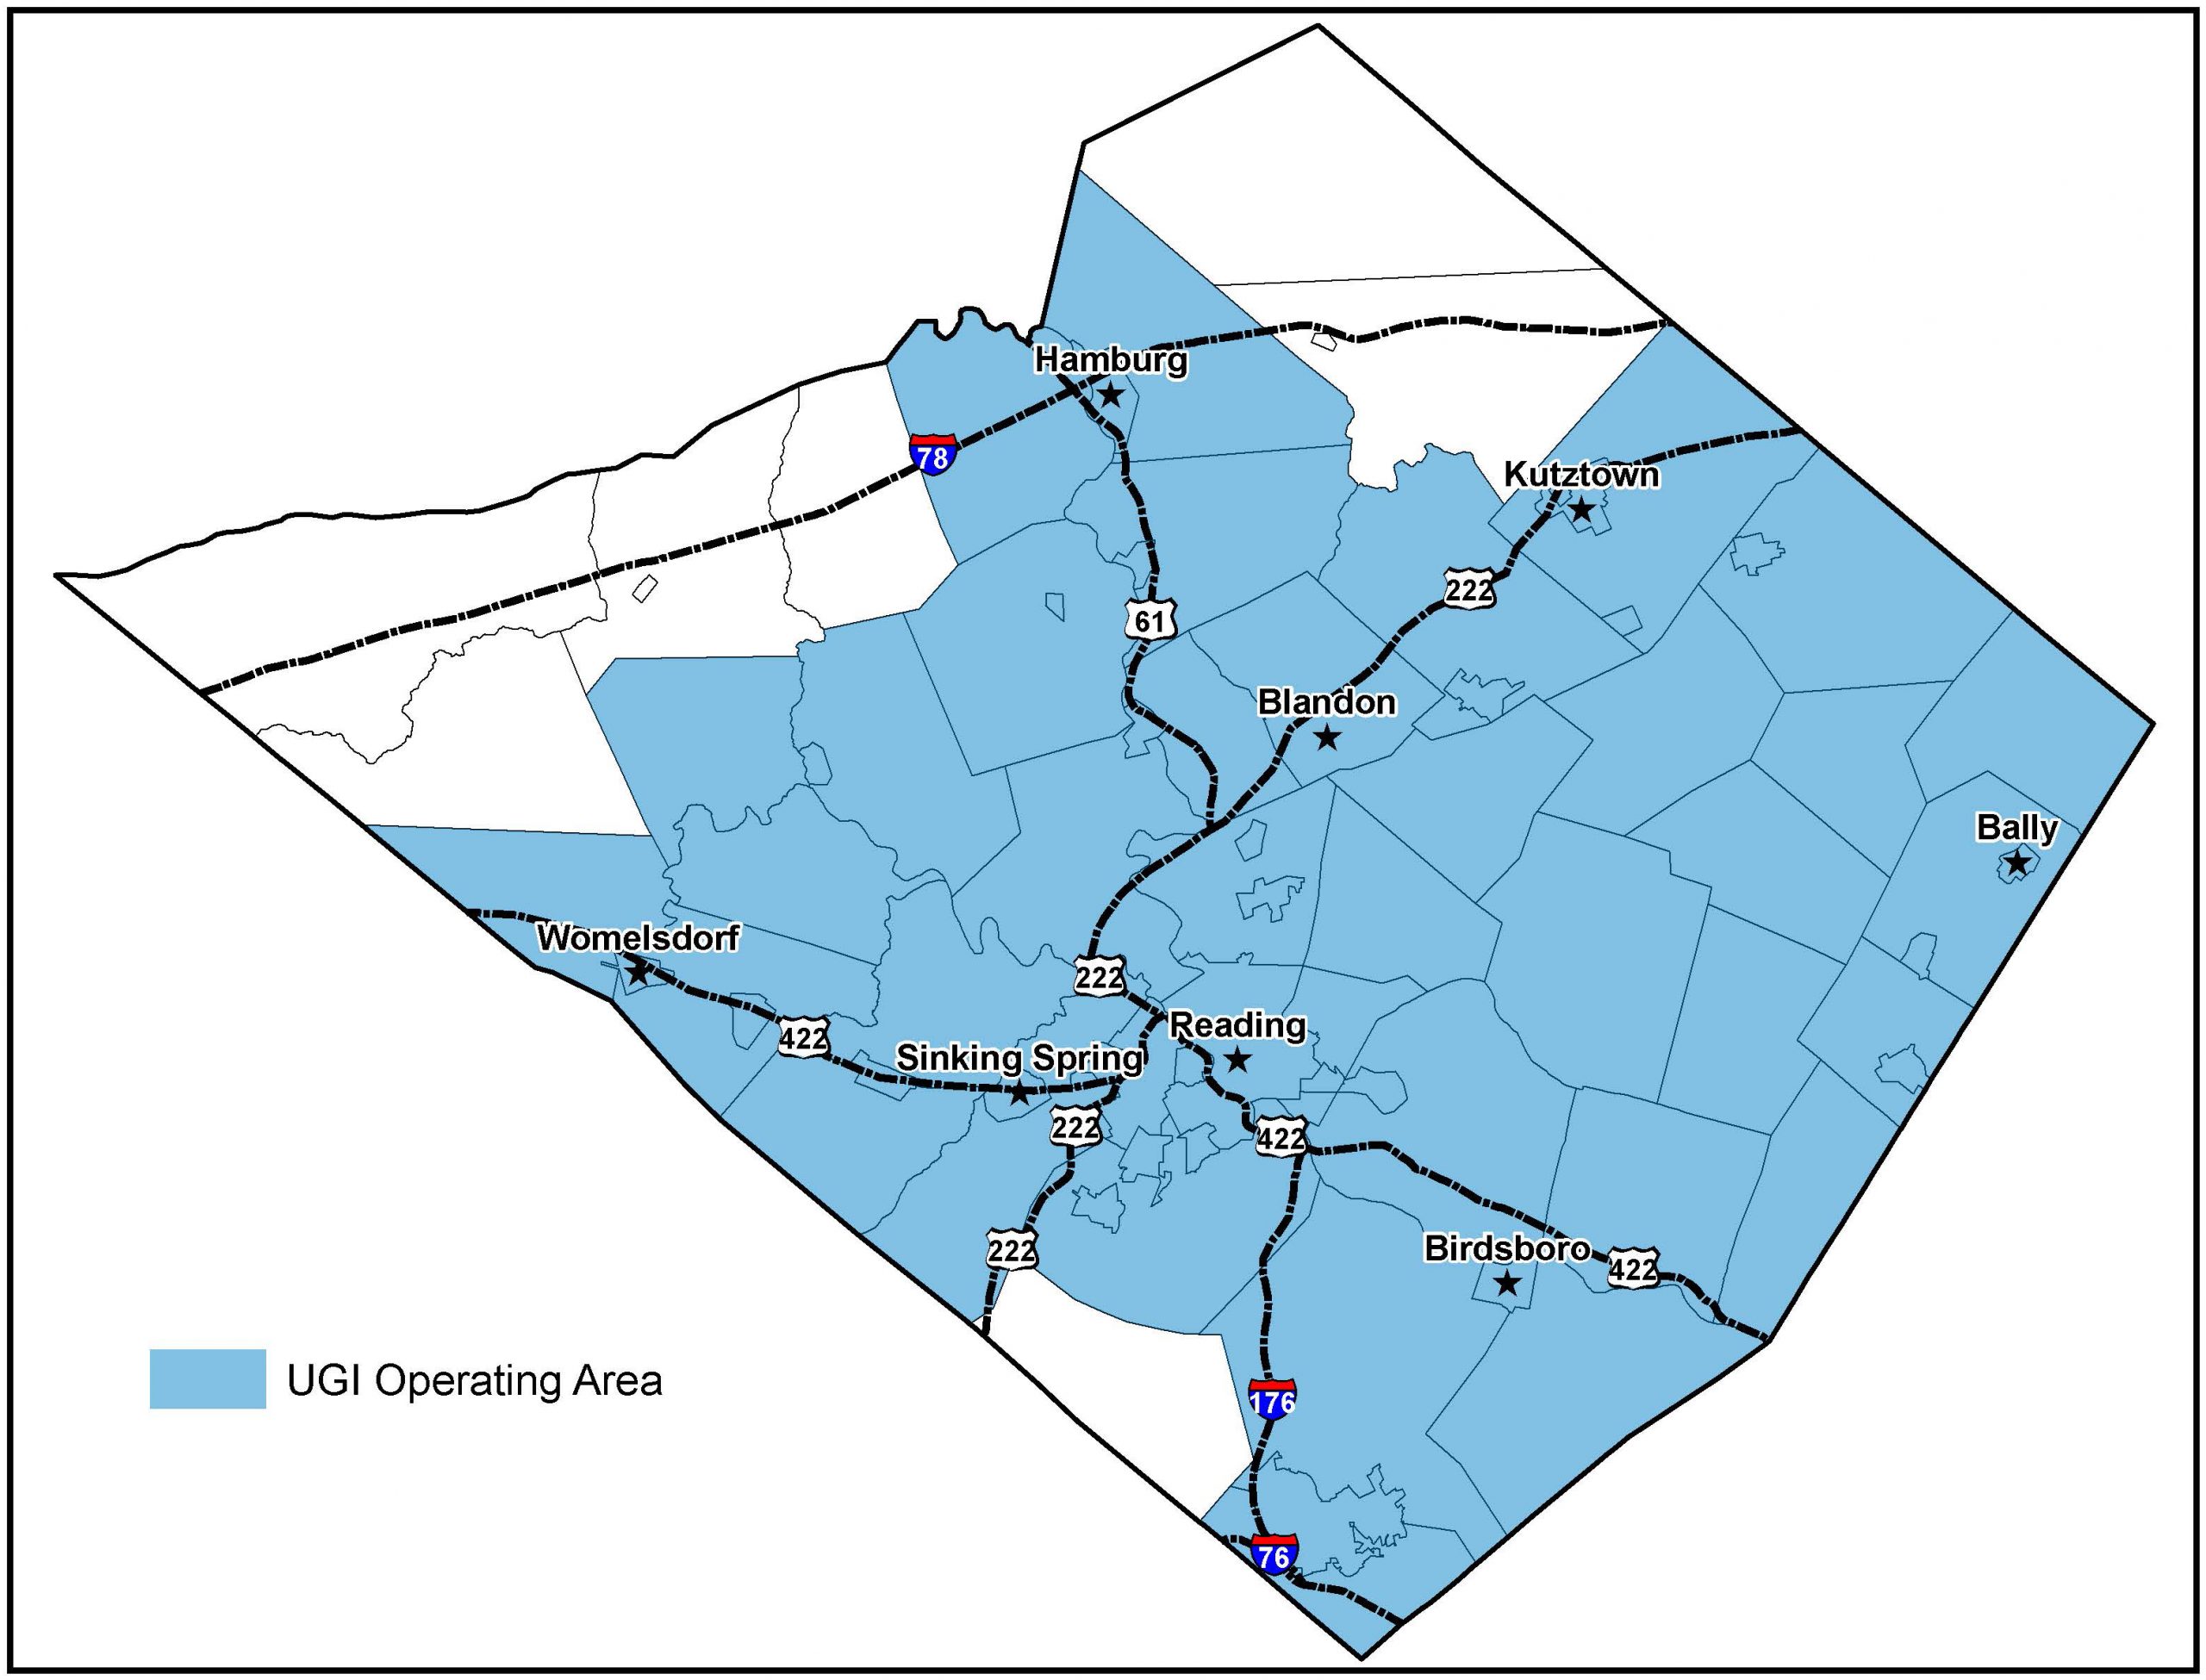 Map of Berks County with some of the major towns and cities such as Reading, Sinking Spring, Birdsboro, Womelsdorf, Hamburg, Kutztown, and Bally. UGI gas territory is shaded blue.